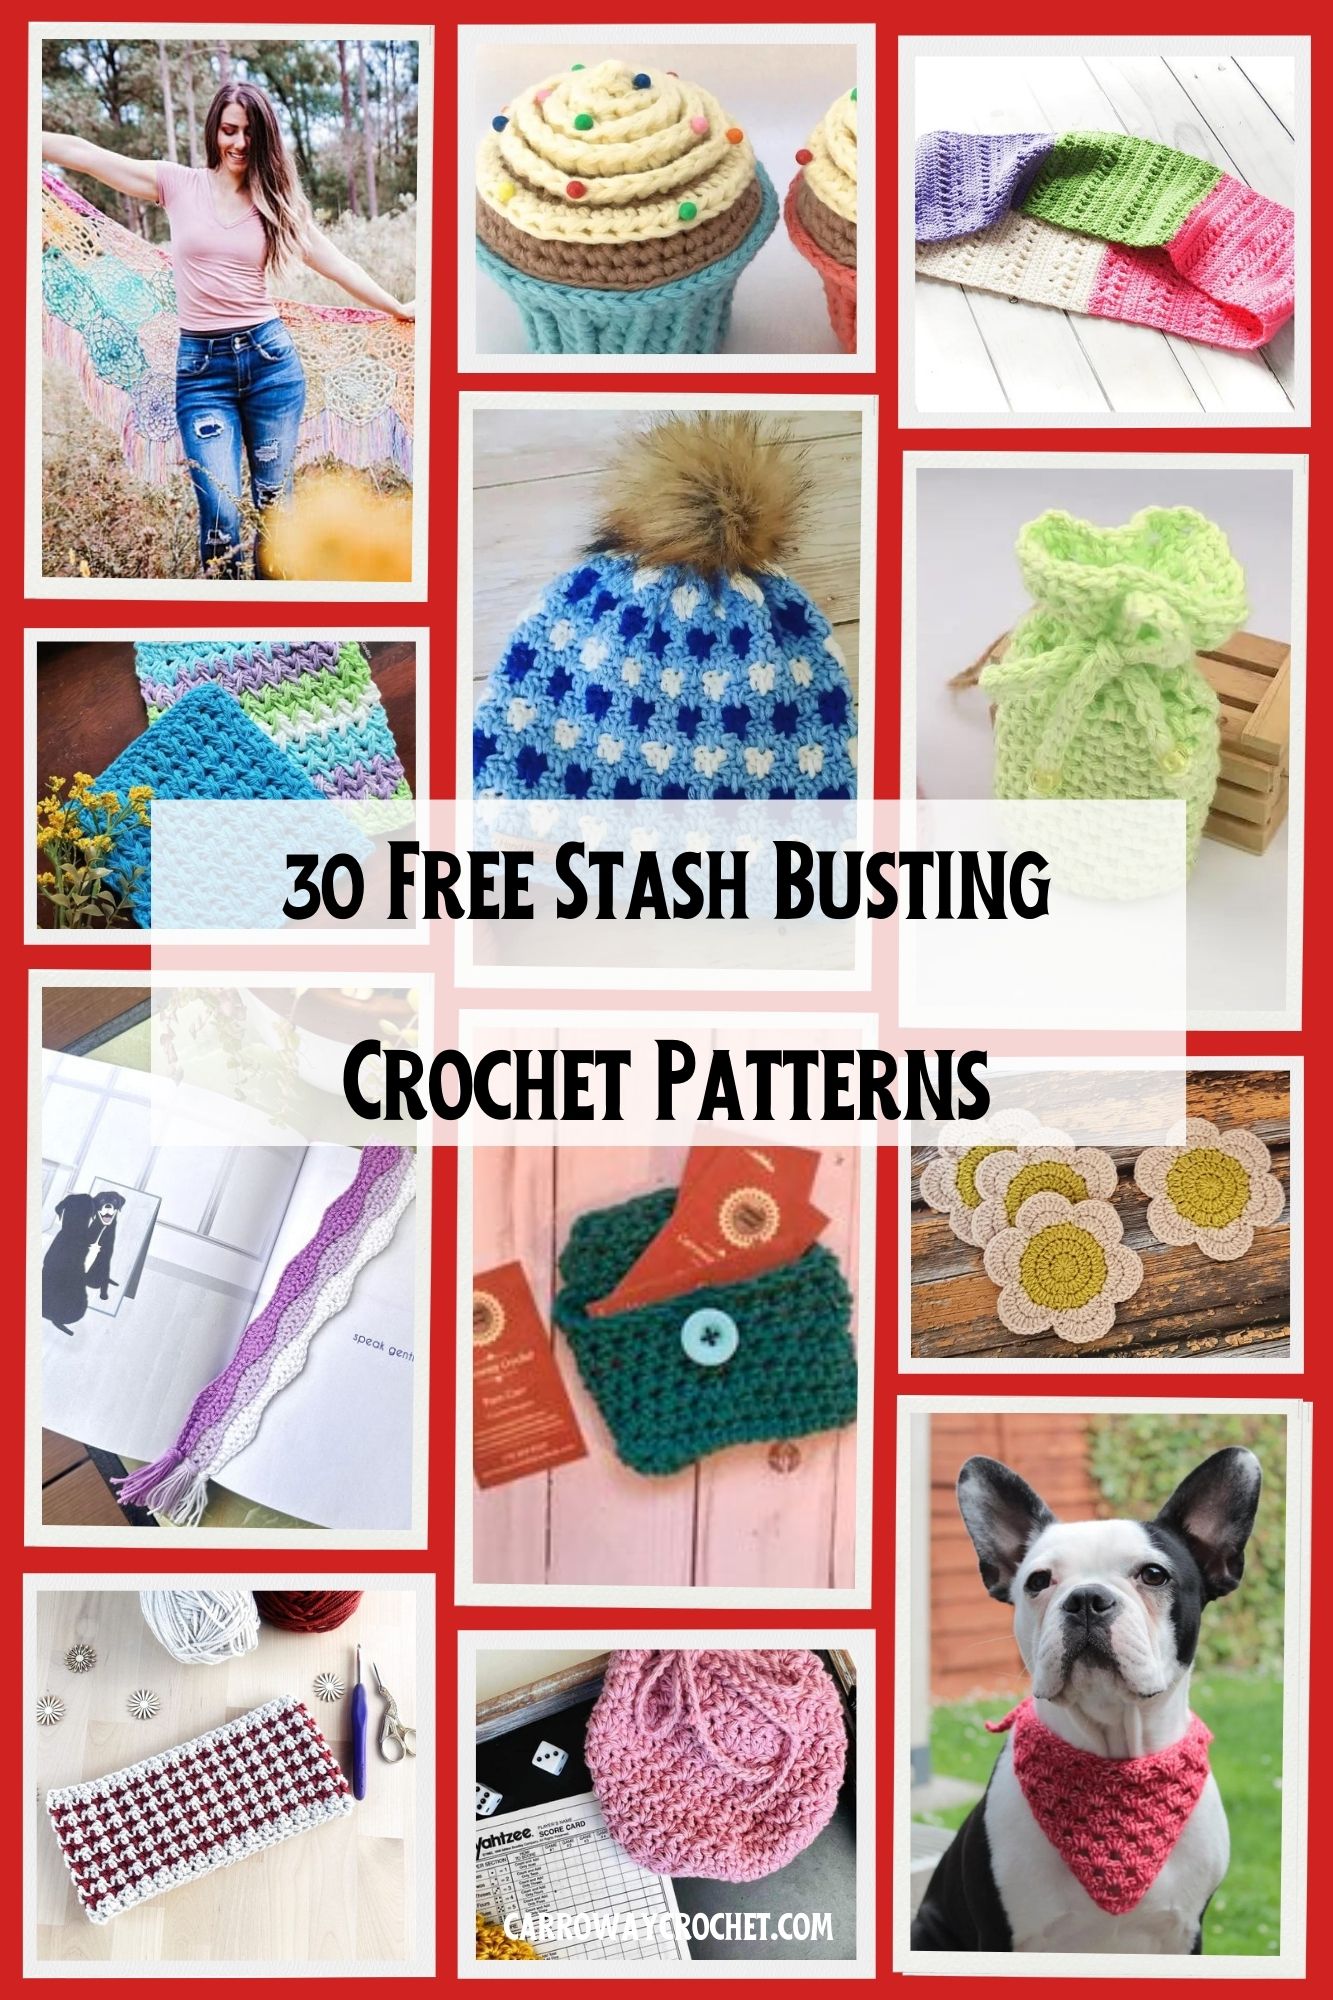 15 Free & Quick Crochet Gifts for Mom - Made by Gootie